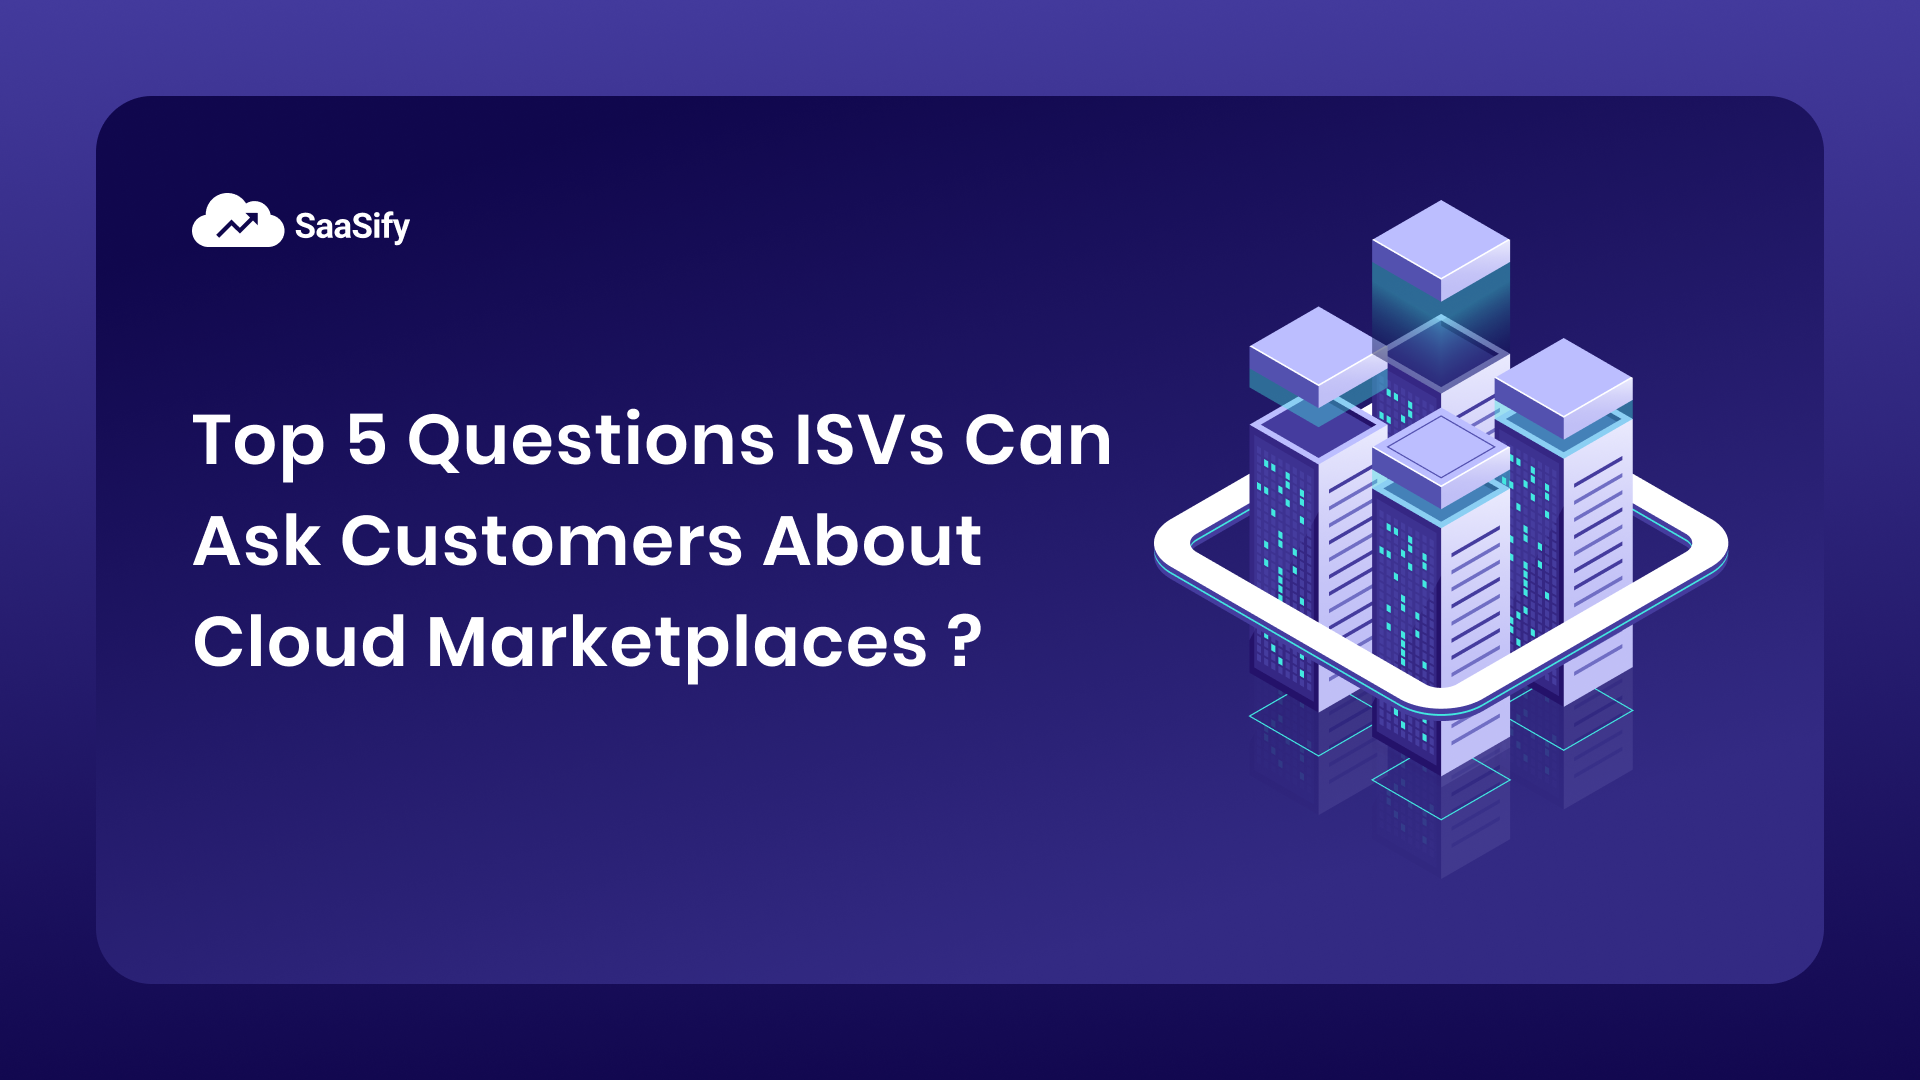 Top 5 powerful questions ISVs can ask customers about cloud marketplaces